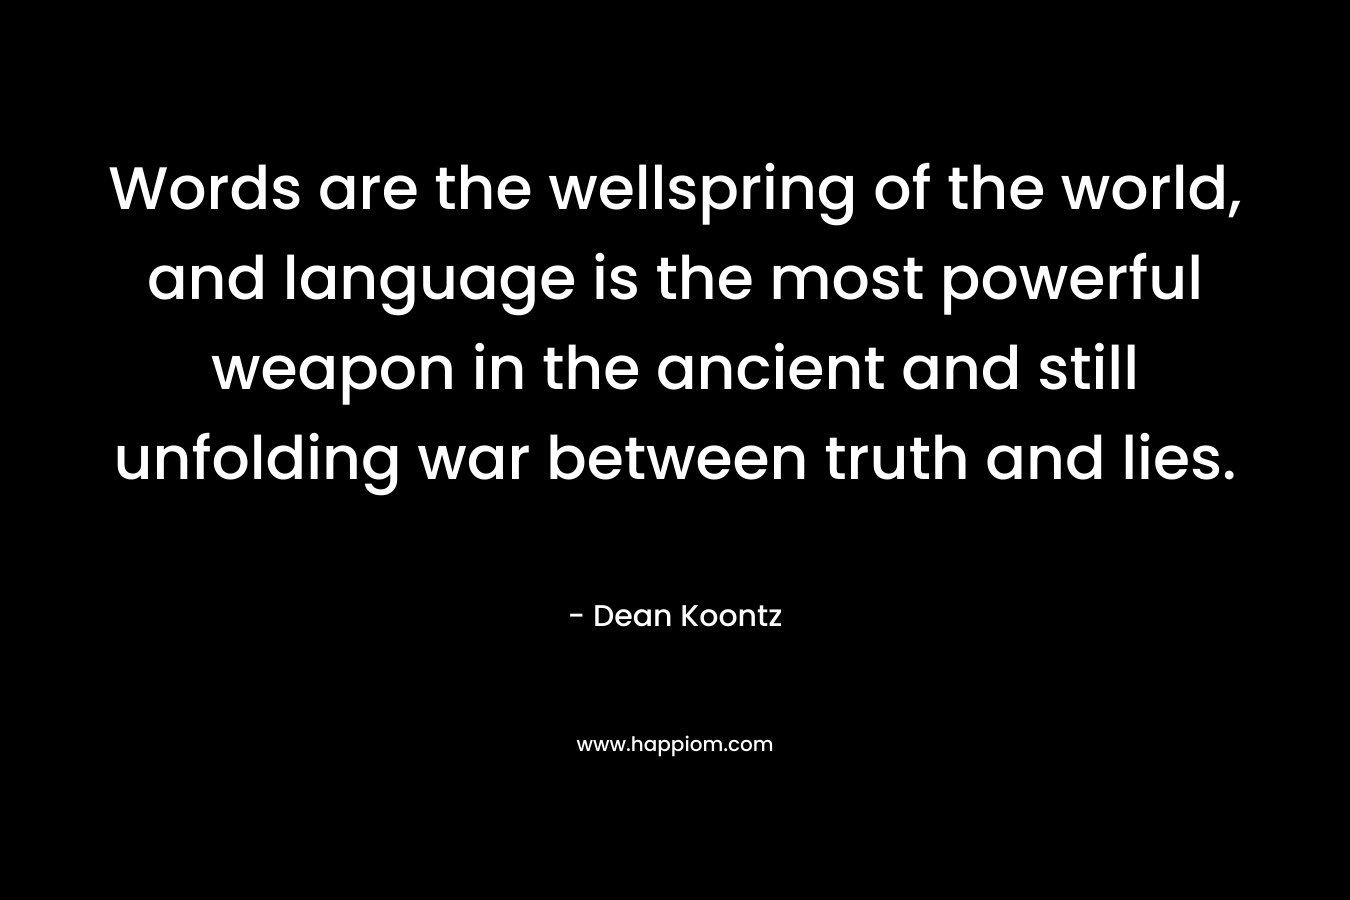 Words are the wellspring of the world, and language is the most powerful weapon in the ancient and still unfolding war between truth and lies. – Dean Koontz